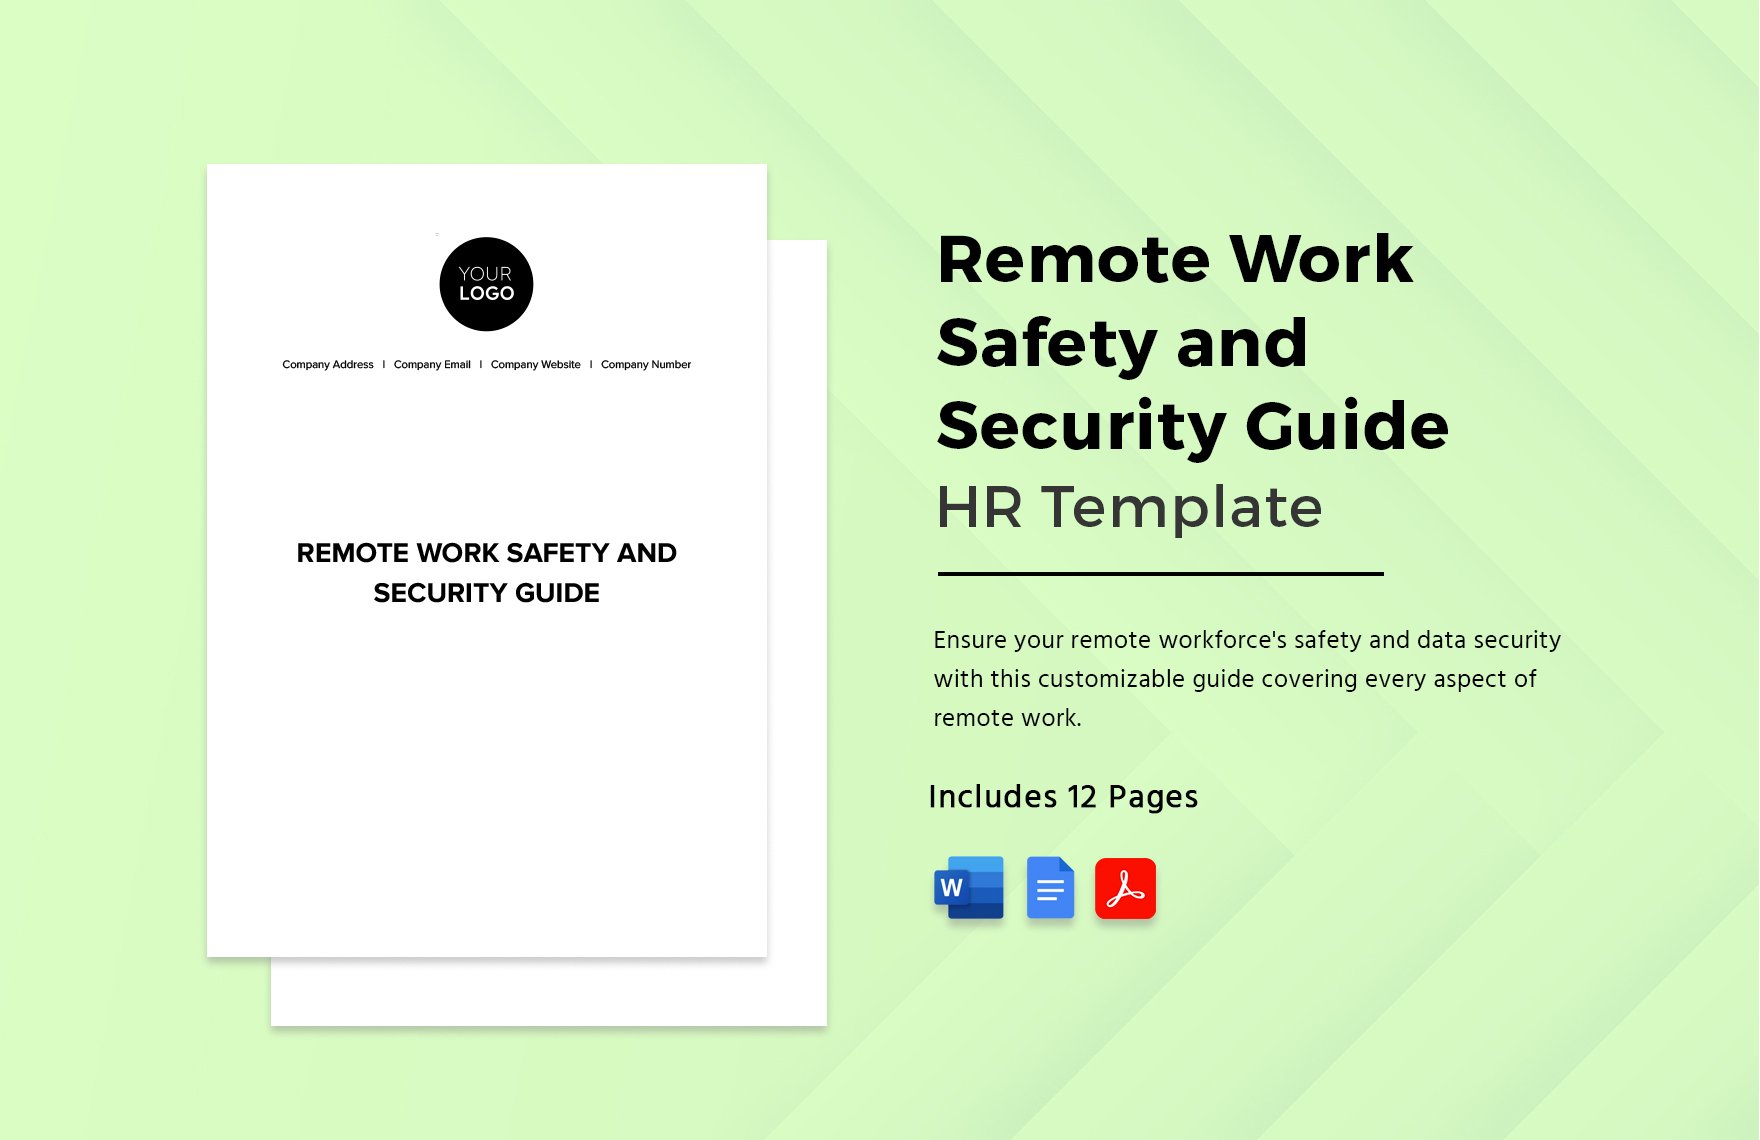 Remote Work Safety and Security Guide HR Template